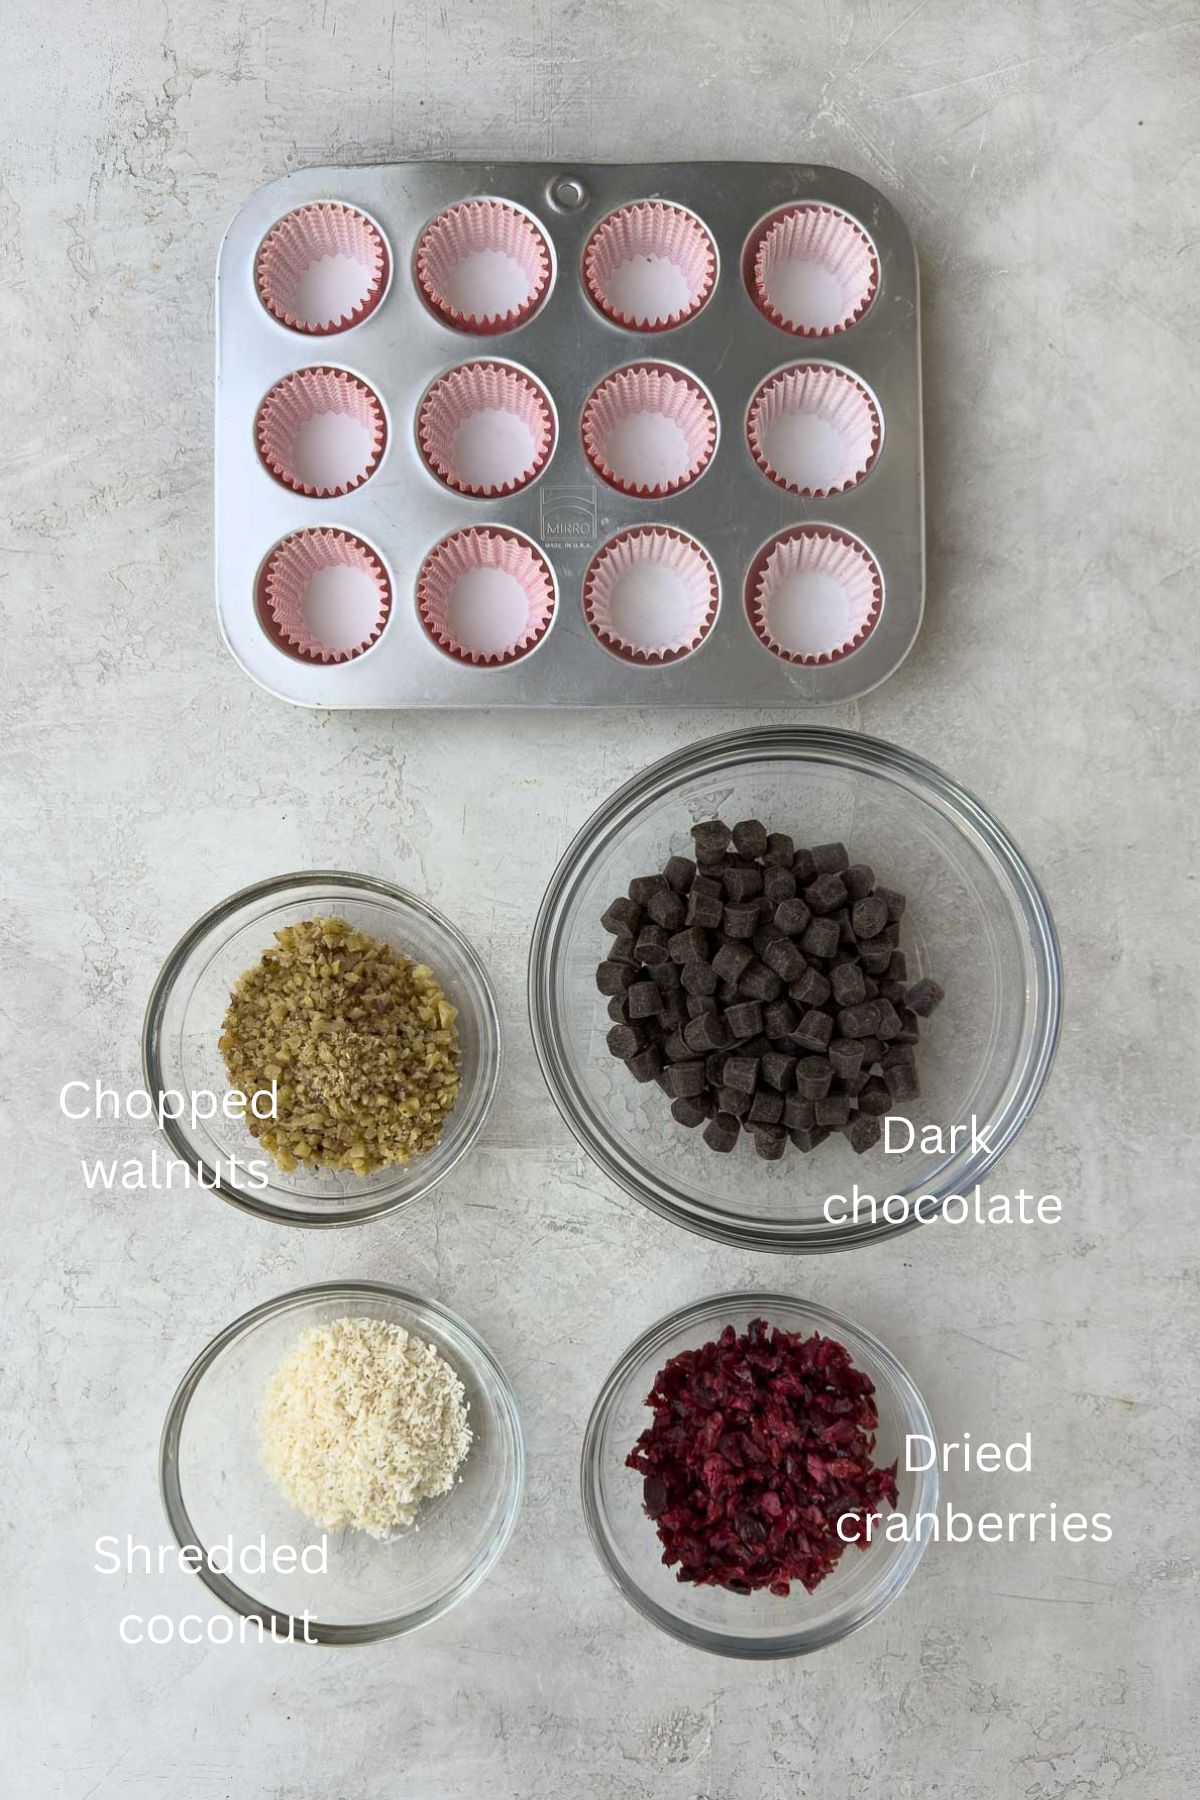 Ingredients for chocolate bark on a counter.